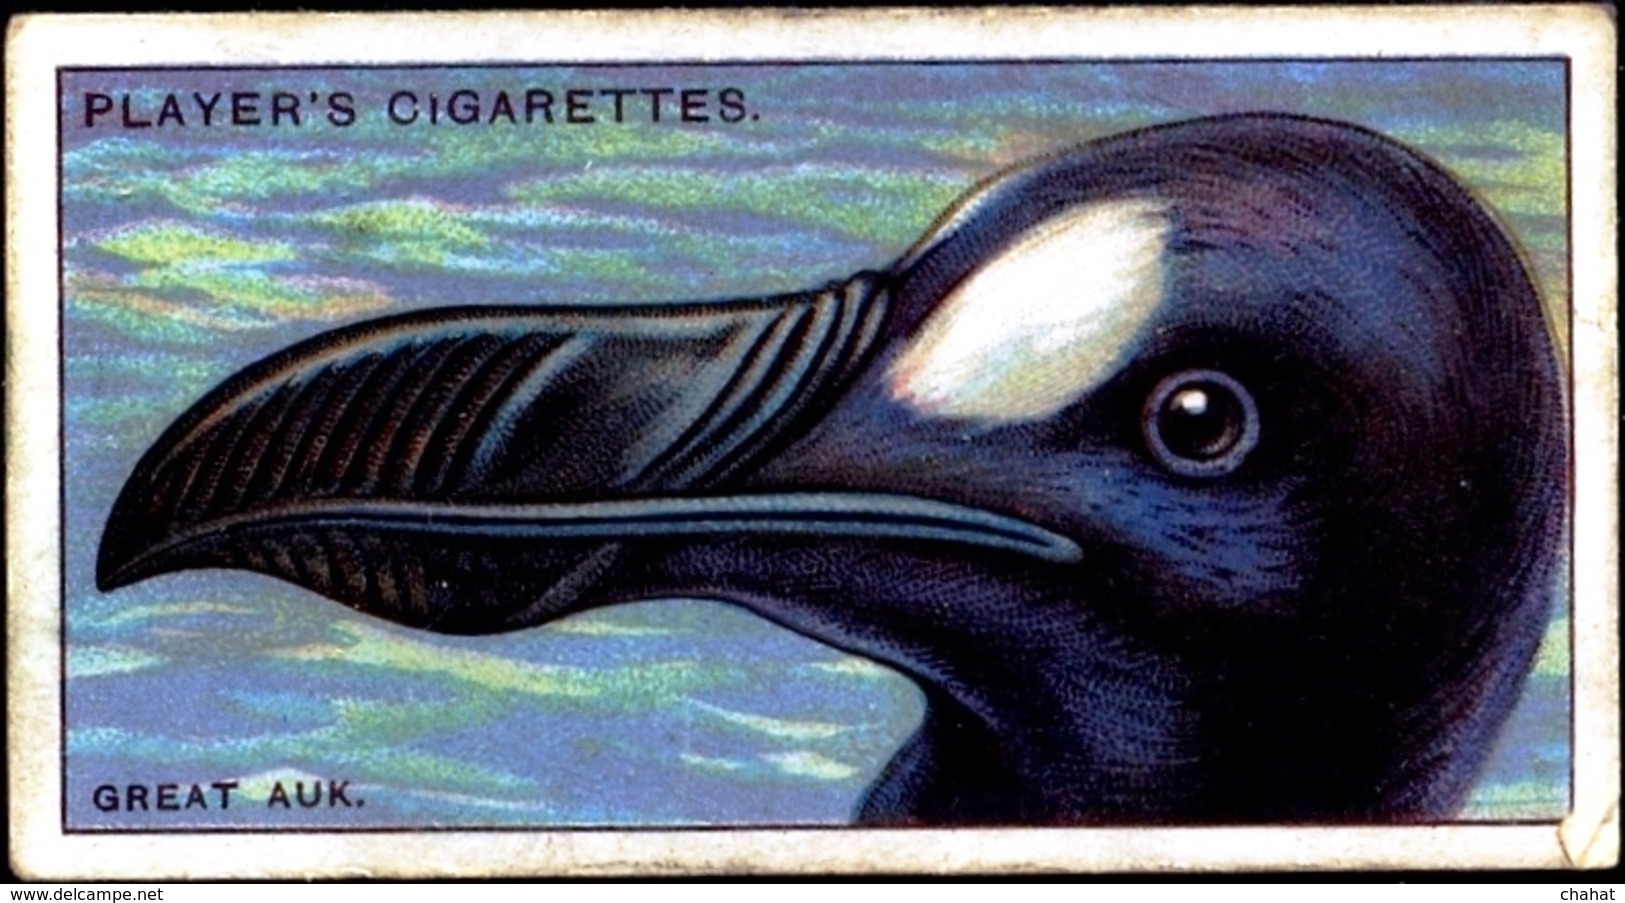 TOBACCO-CIGARETTES LABELS-JOHN PLAYERS & SONS-BIRDS-CURIOUS BEAKS-BIG COLLECTION-SCARCE-D4